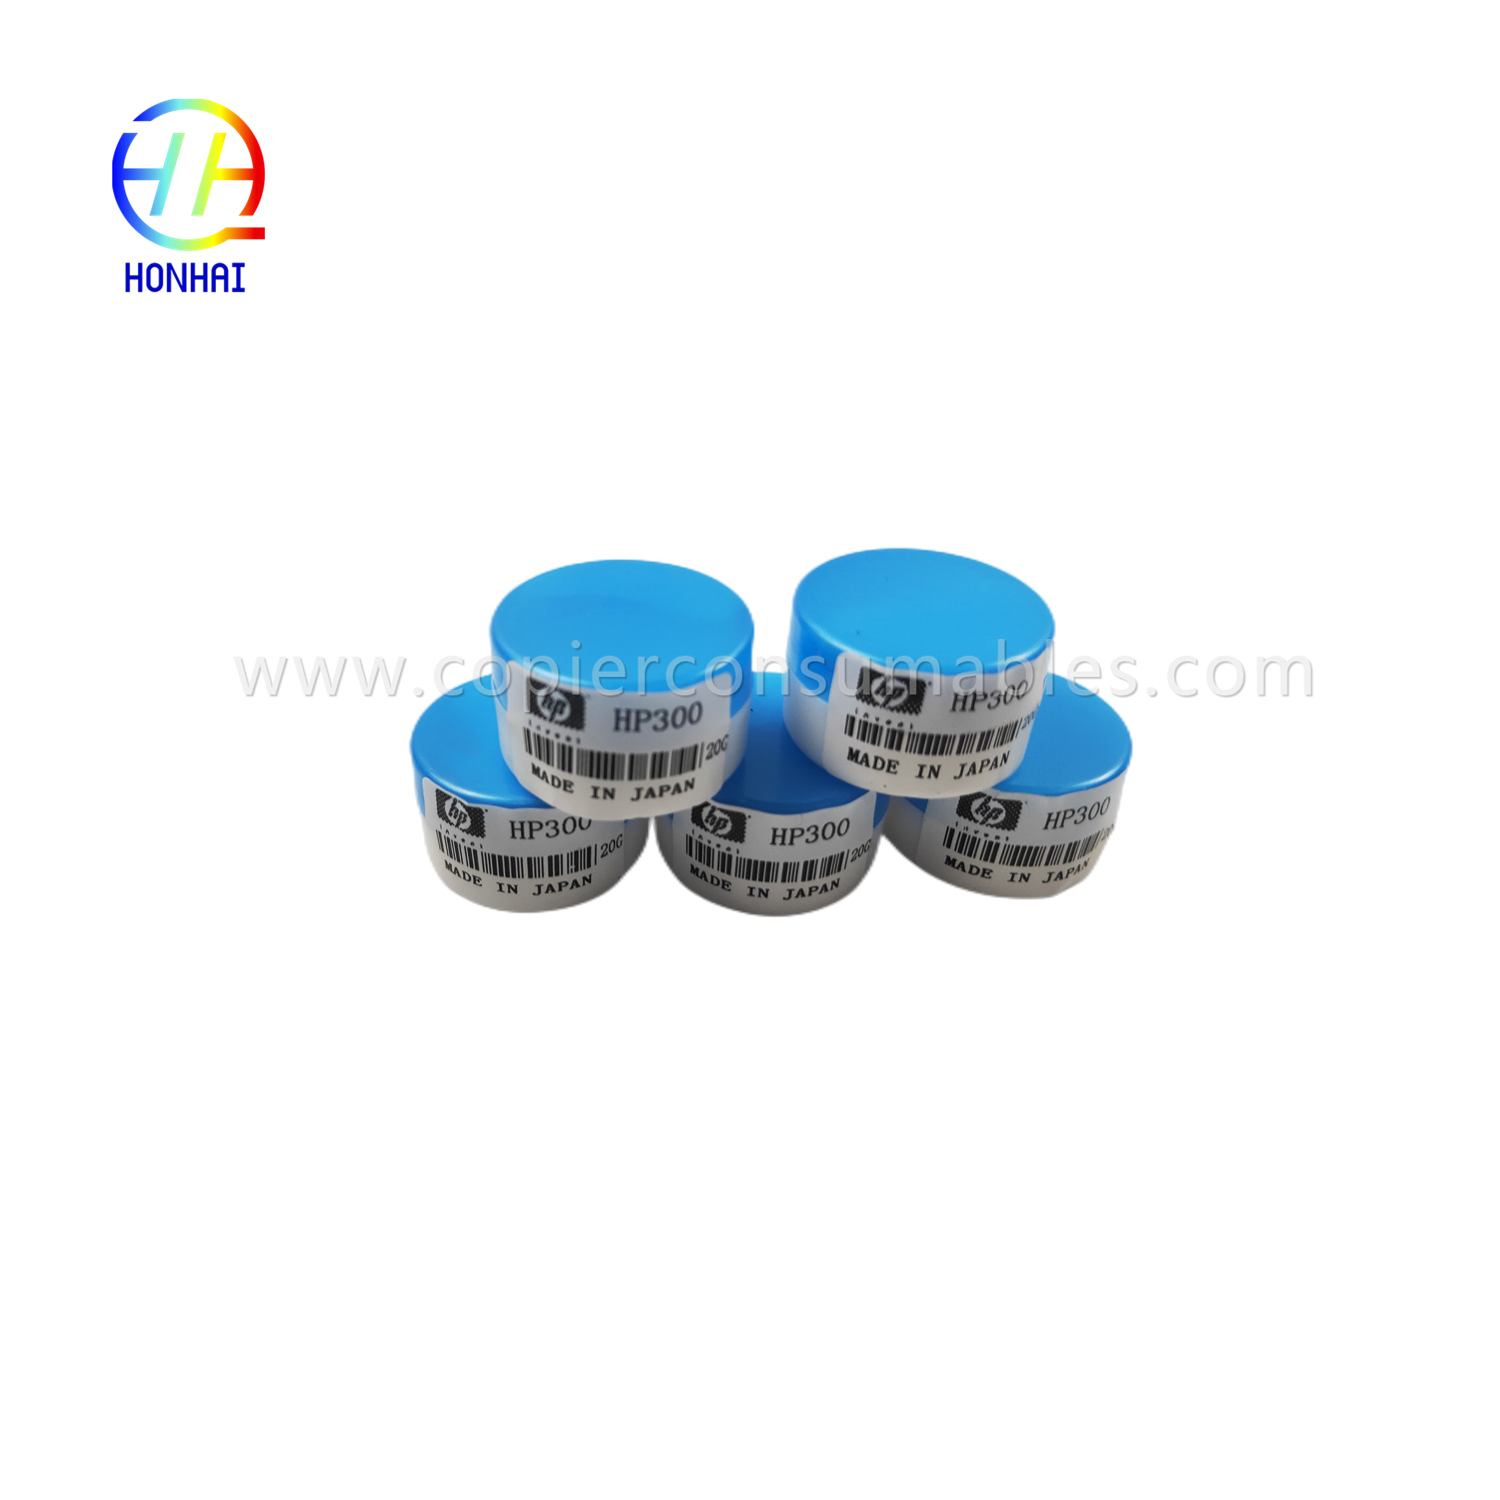 https://c585.goodao.net/origen-grease-20g-g8005-hp300-for-hp-canon-brother-lexmark-xerox-epson-series-fuser-film-sleeves-product/